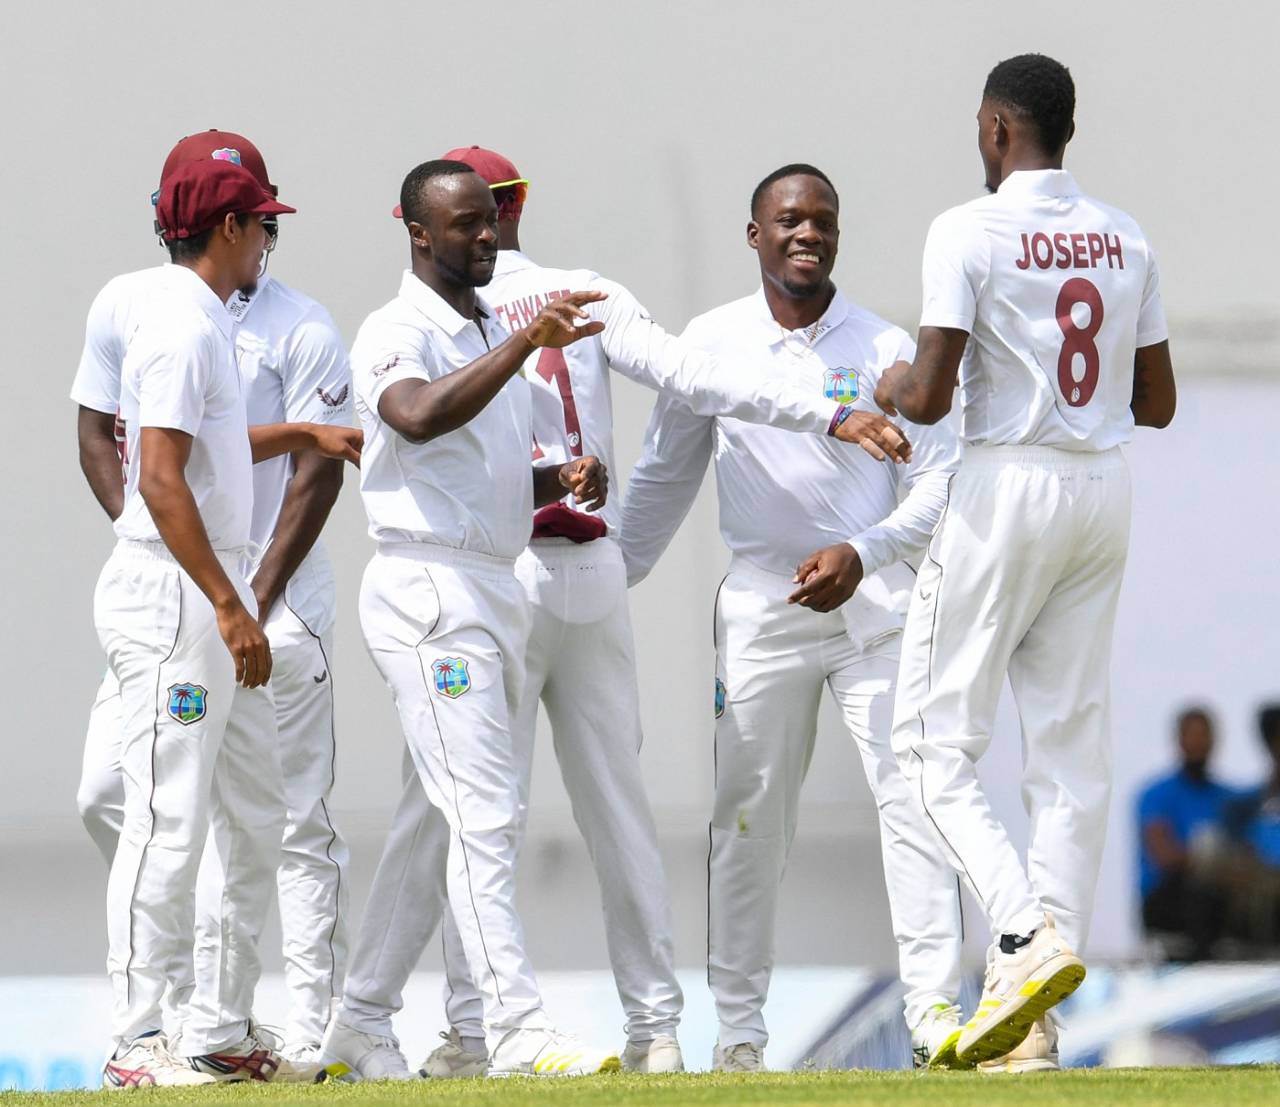 Kemar Roach picked up two wickets while Alzarri Joseph had three to show, West Indies vs Bangladesh, 1st Test, Antigua, Day 1, June 16, 2022
